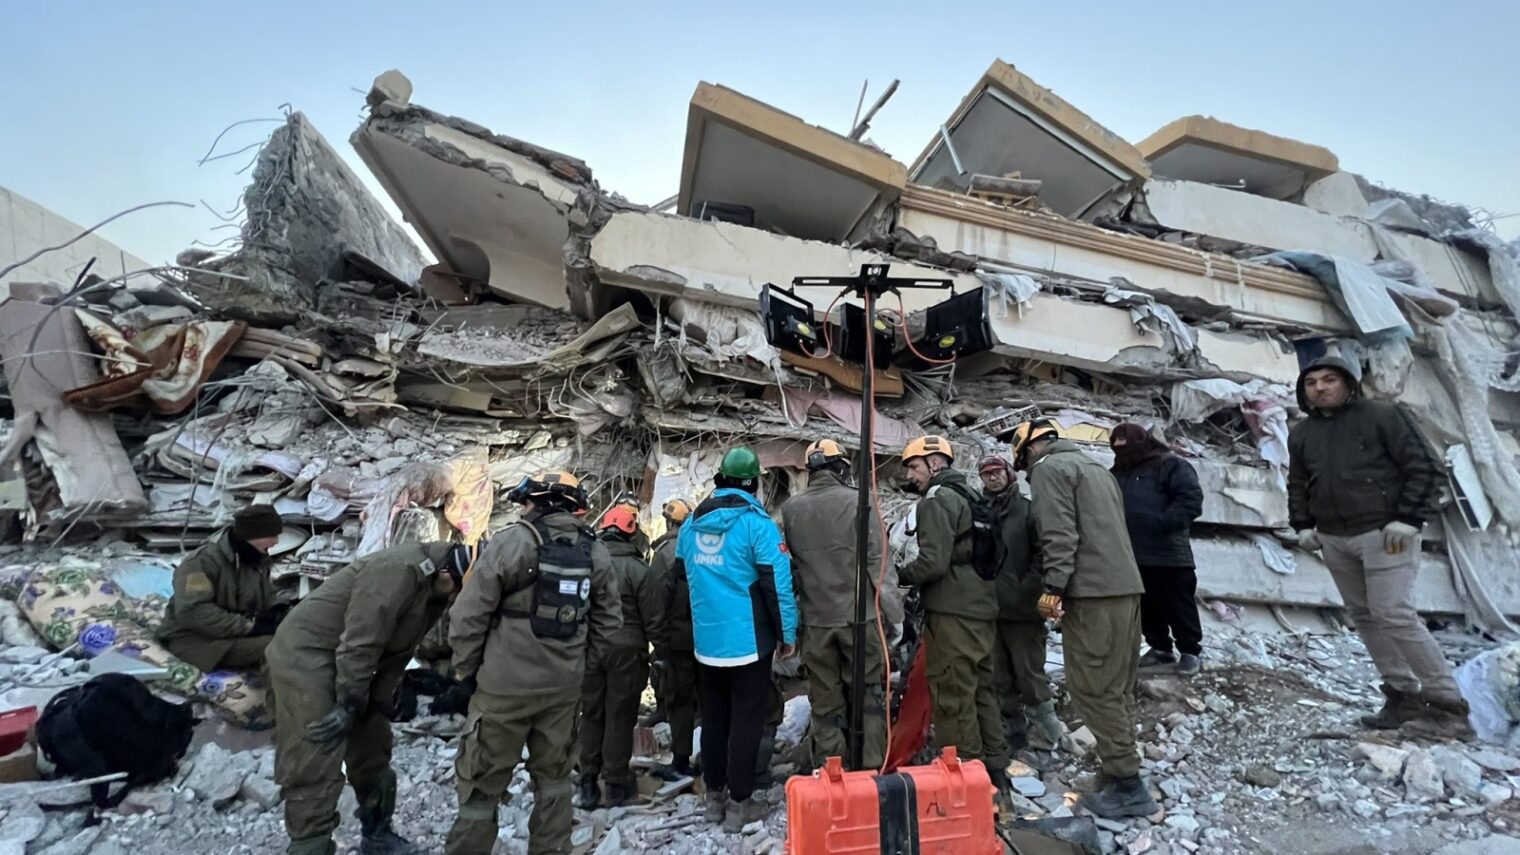 Israeli experts work alongside Turkish rescue forces to find survivors in the wreckage, February 7, 2023. Photo courtesy Ministry of Foreign Affairs